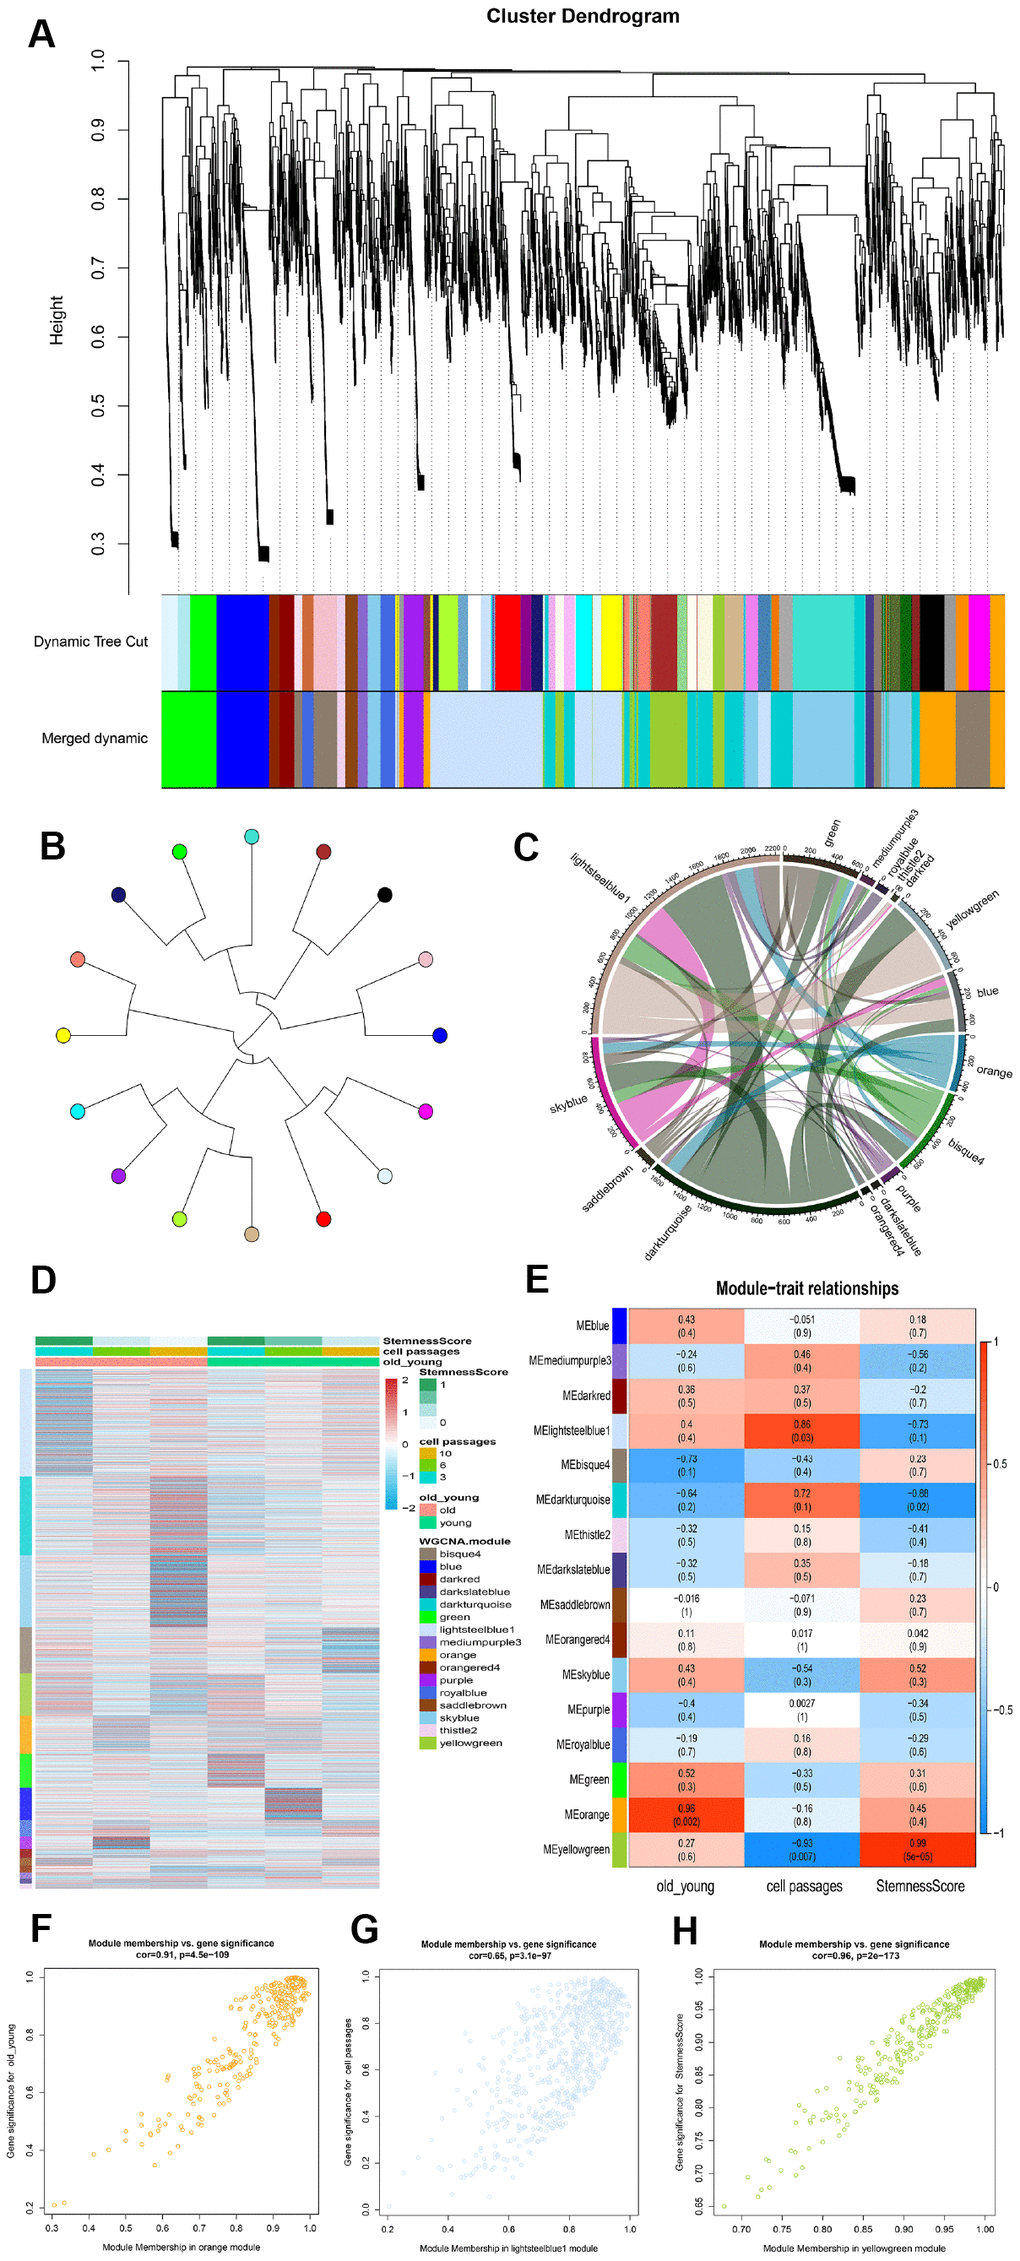 Identification of modules that was significantly correlated with phenotype. (A) Clustering dendrogram and modules. Each gene is represented by a leaf in the tree, where the y-axis represents the network distance determined by the topological overlap (TO) and different colors indicate the combined module membership. A total of 16 modules were identified. (B) Module tree diagram. Each point represents a module, and the lines indicate the interaction between the modules. (C) Circplot between modules. (D) Cluster analysis heatmap showing the expression of different modules in different phenotypes. (E) A heatmap of the correlation between module eigengenes and ADSCs phenotype. (F–H) The scatter plot shows the correlation between different phenotypes and MEorange, MElightsteelblue1 and MEyellowgreen.